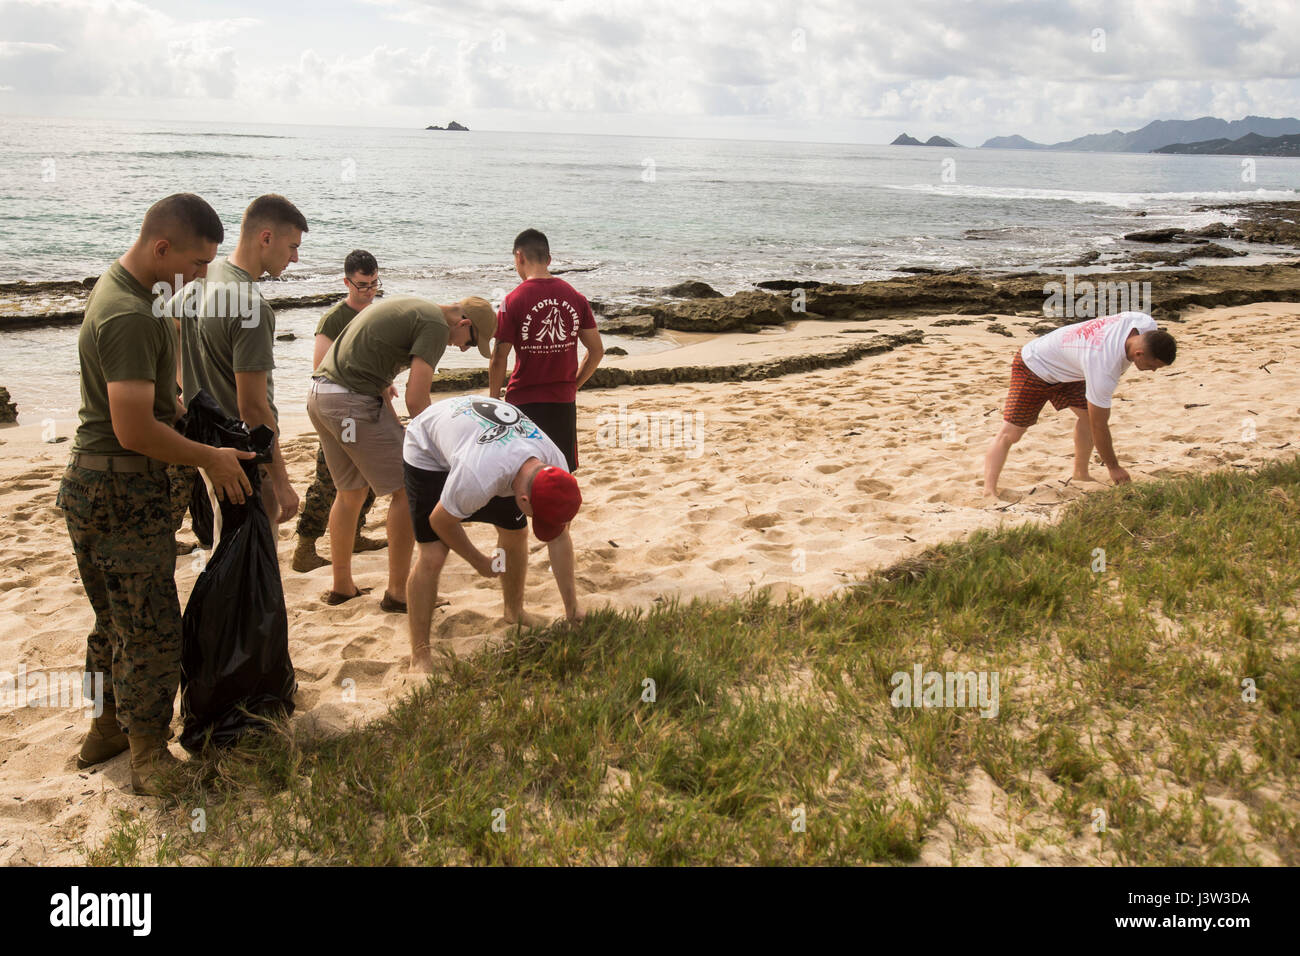 Marines with Marine Unmanned Aerial Vehicle Squadron 3 pick up trash during a base wide cleanup at Pyramid Rock beach aboard Marine Corps Base Hawaii on April 20, 2017. The semiannual cleanup event, “Malama Ka Aina,” is dedicated to cleaning MCB Hawaii, Pu’uola Rifle Range, Marine Corps Training Area Bellows, and Camp Smith. Malama Ka Aina is Hawaiian for “care for the land,” where Marines and Sailors from various units aboard MCB Hawaii work together to help keep each military installation litter free. (U.S. Marine Corps photo by Lance Cpl. Isabelo Tabanguil) Stock Photo